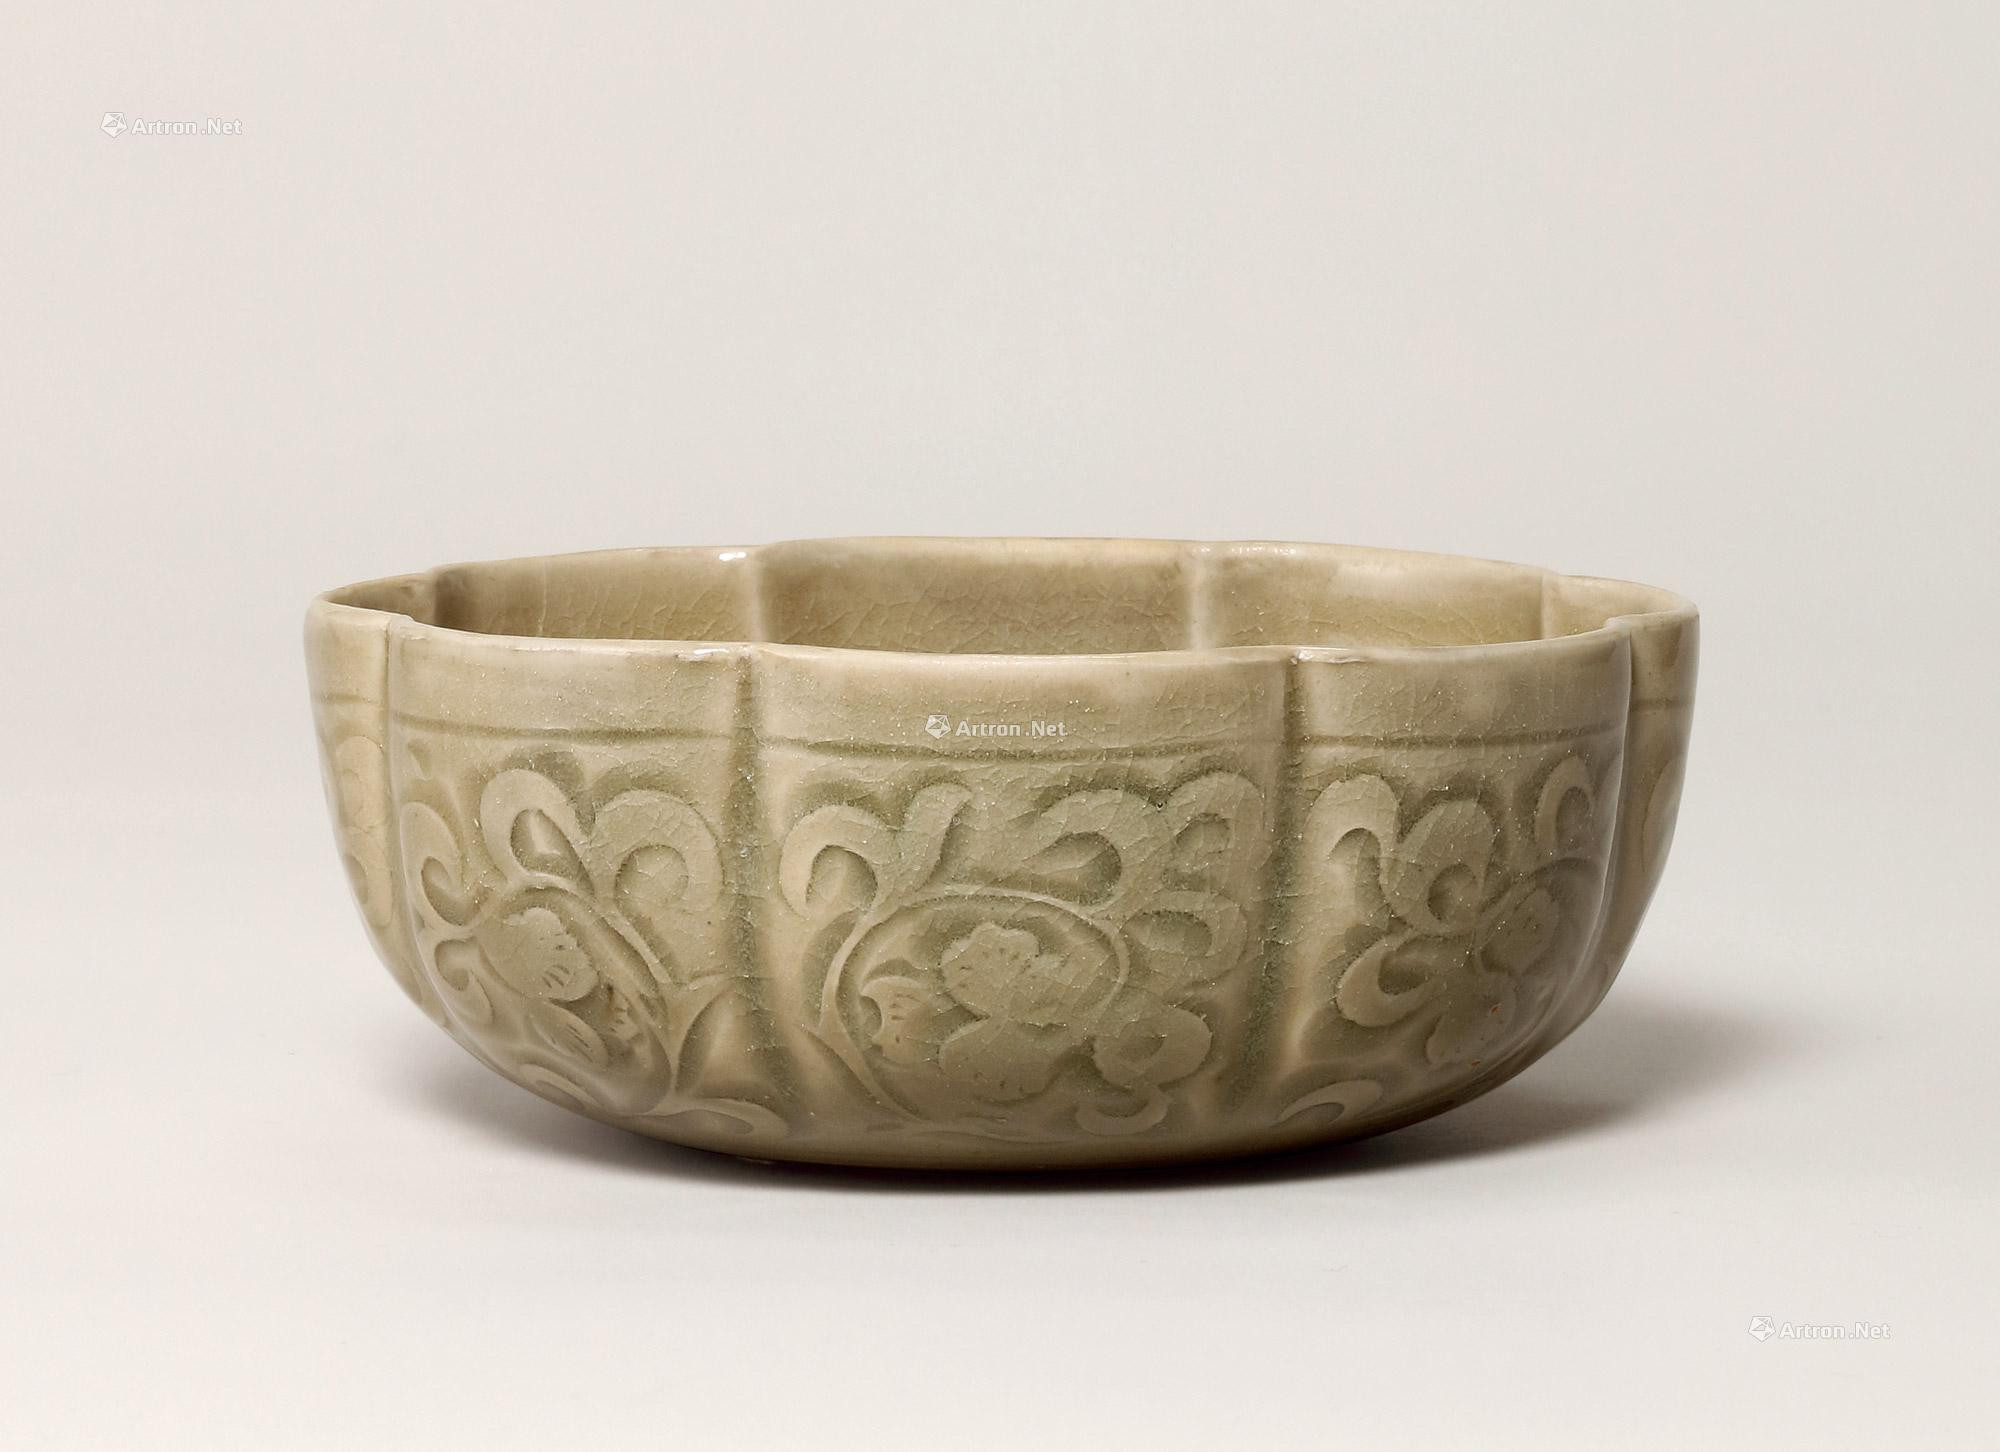 A GLAUCOUS GLAZE BOWL WITH FLOWER CARVING